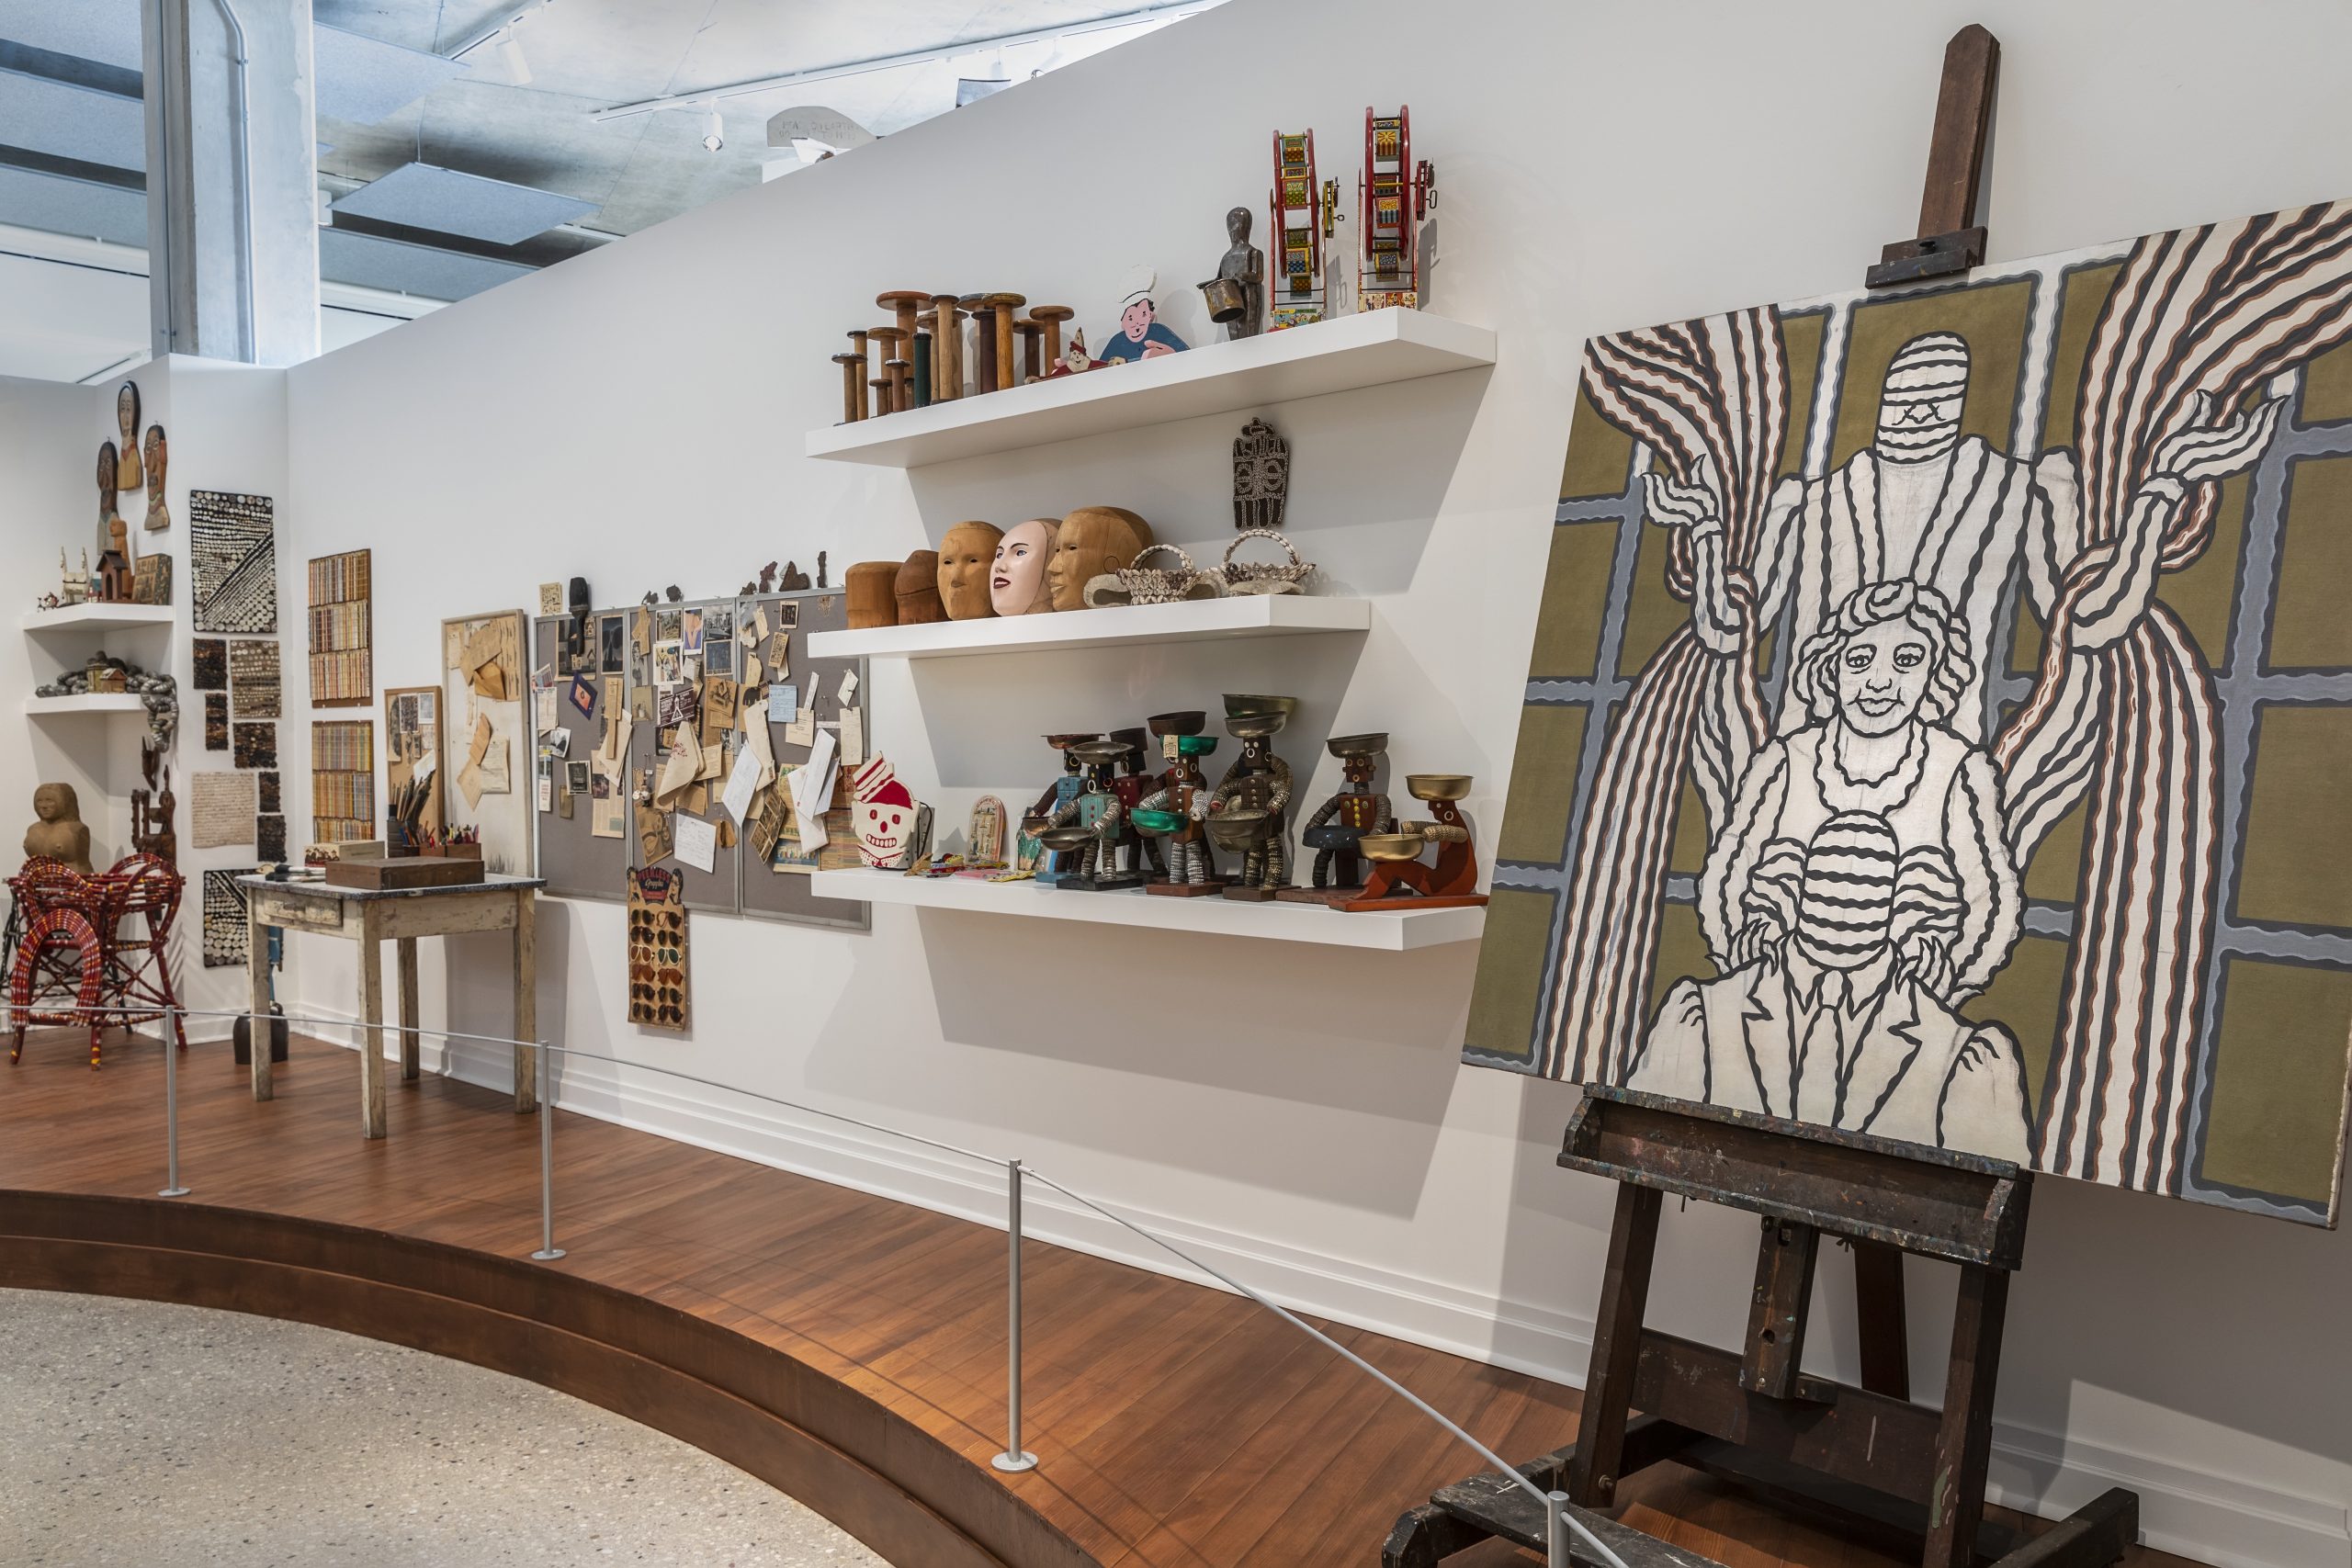 Building a Home for Muses: An Interview with Art Preserve Curator Laura Bickford on Ray Yoshida’s Collections